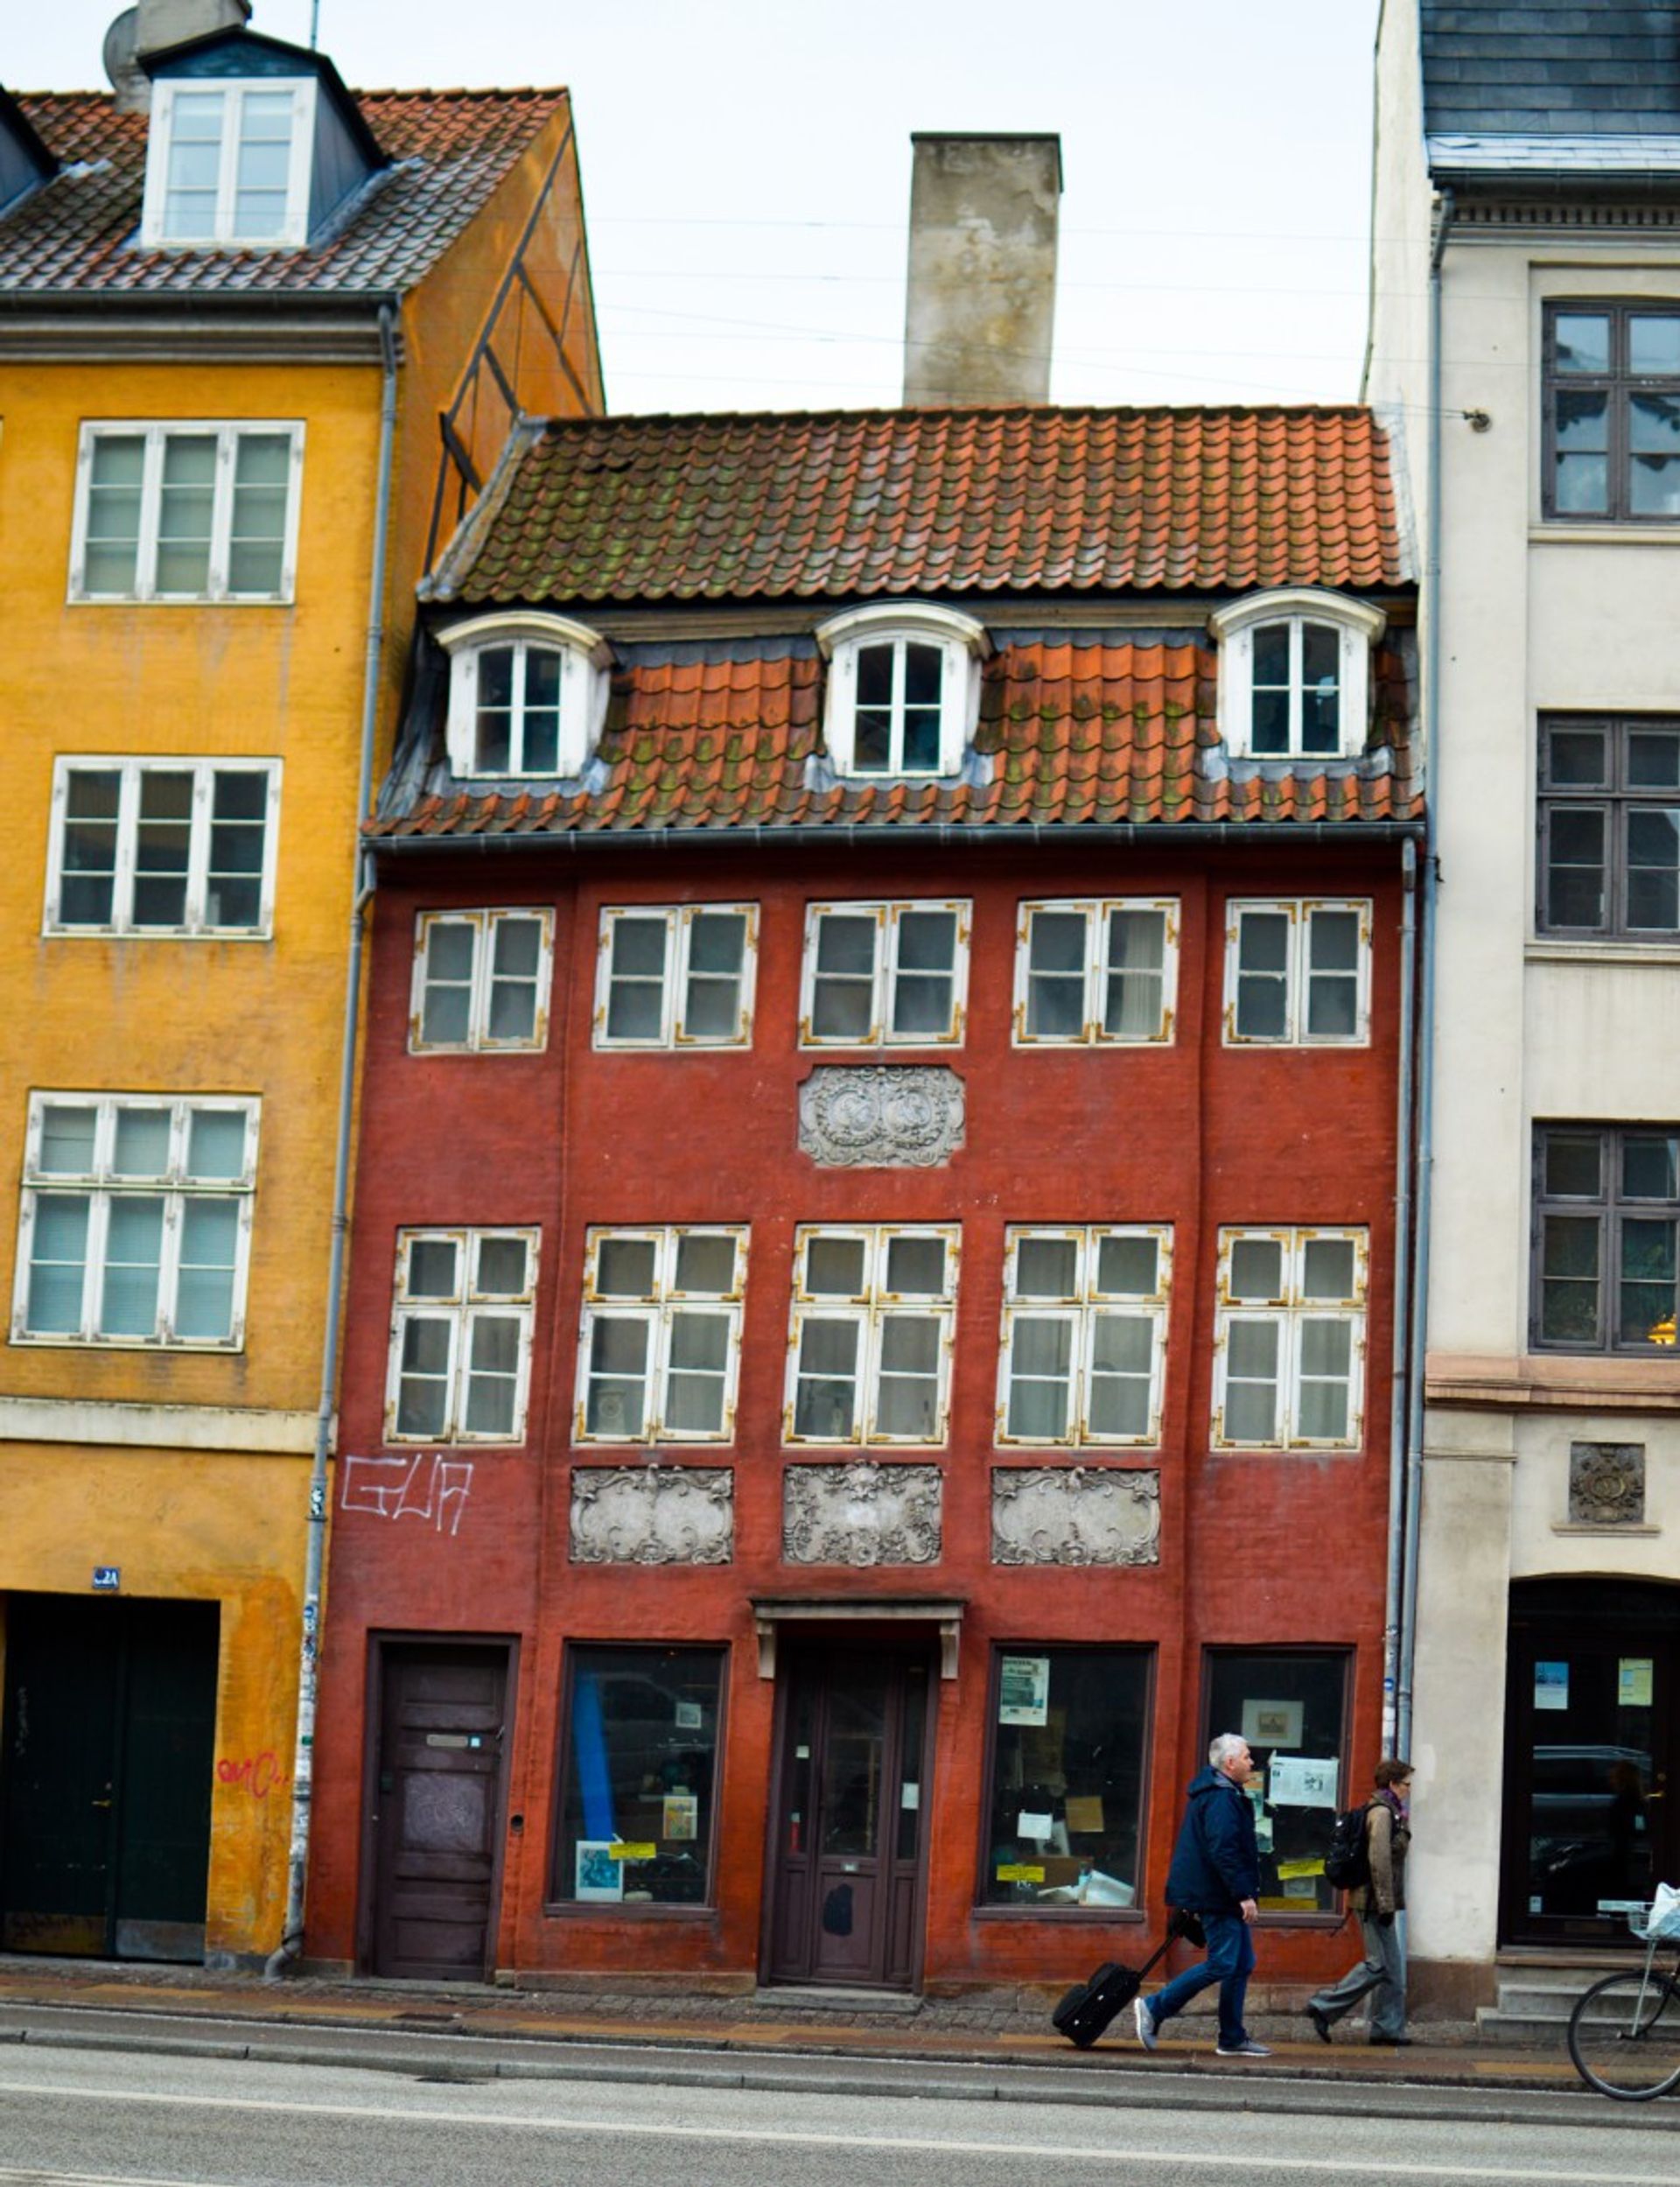 Tightly squeezed, slightly uneven cute building